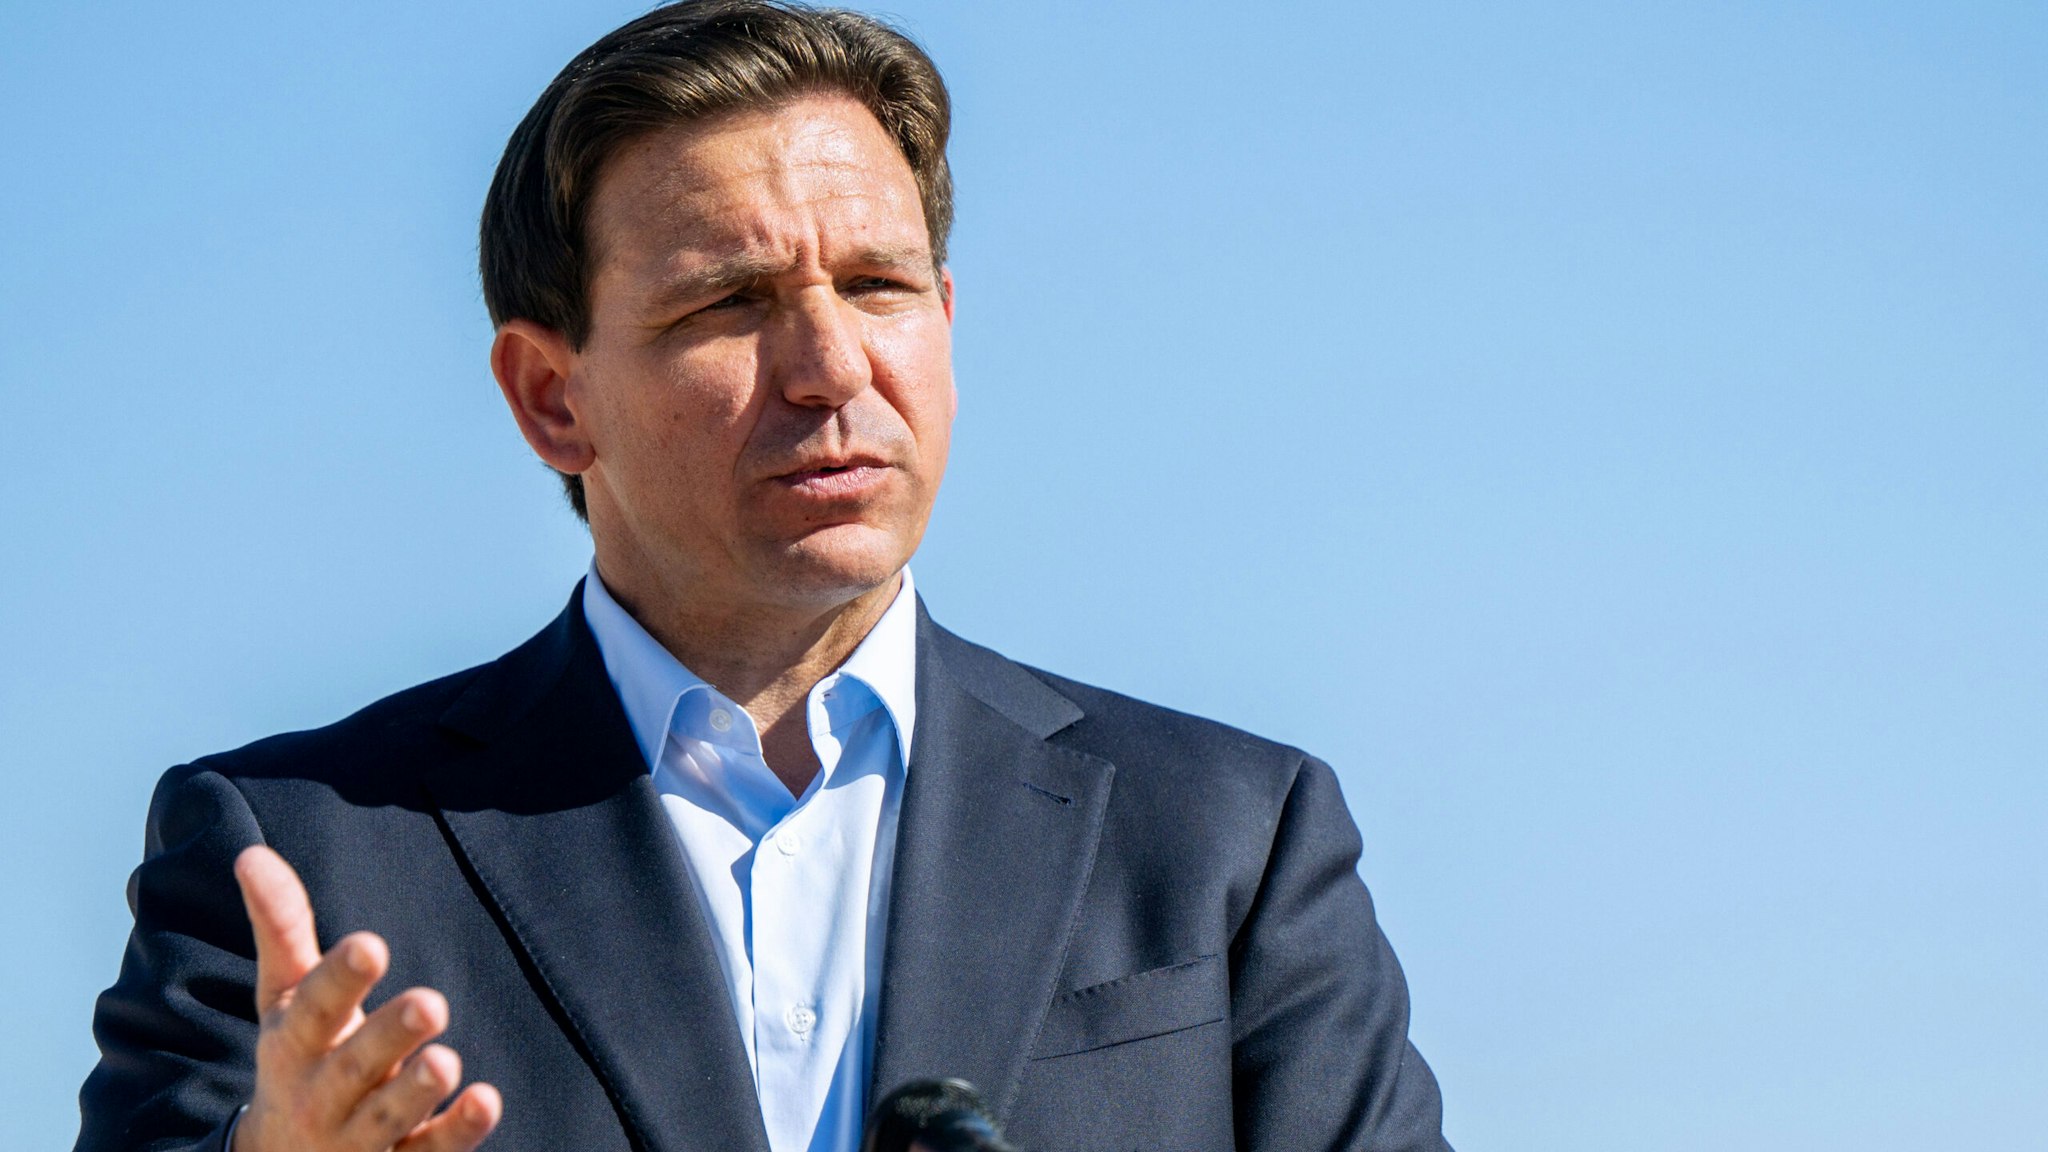 MIDLAND, TEXAS - SEPTEMBER 20: Florida Gov. Ron DeSantis speaks to members of the media and site workers at the Permian Deep Rock Oil Company site during a campaign event on September 20, 2023 in Midland, Texas. Gov. DeSantis unveiled future plans on energy policy, climate change ideology and gas production if he is elected president in 2024.